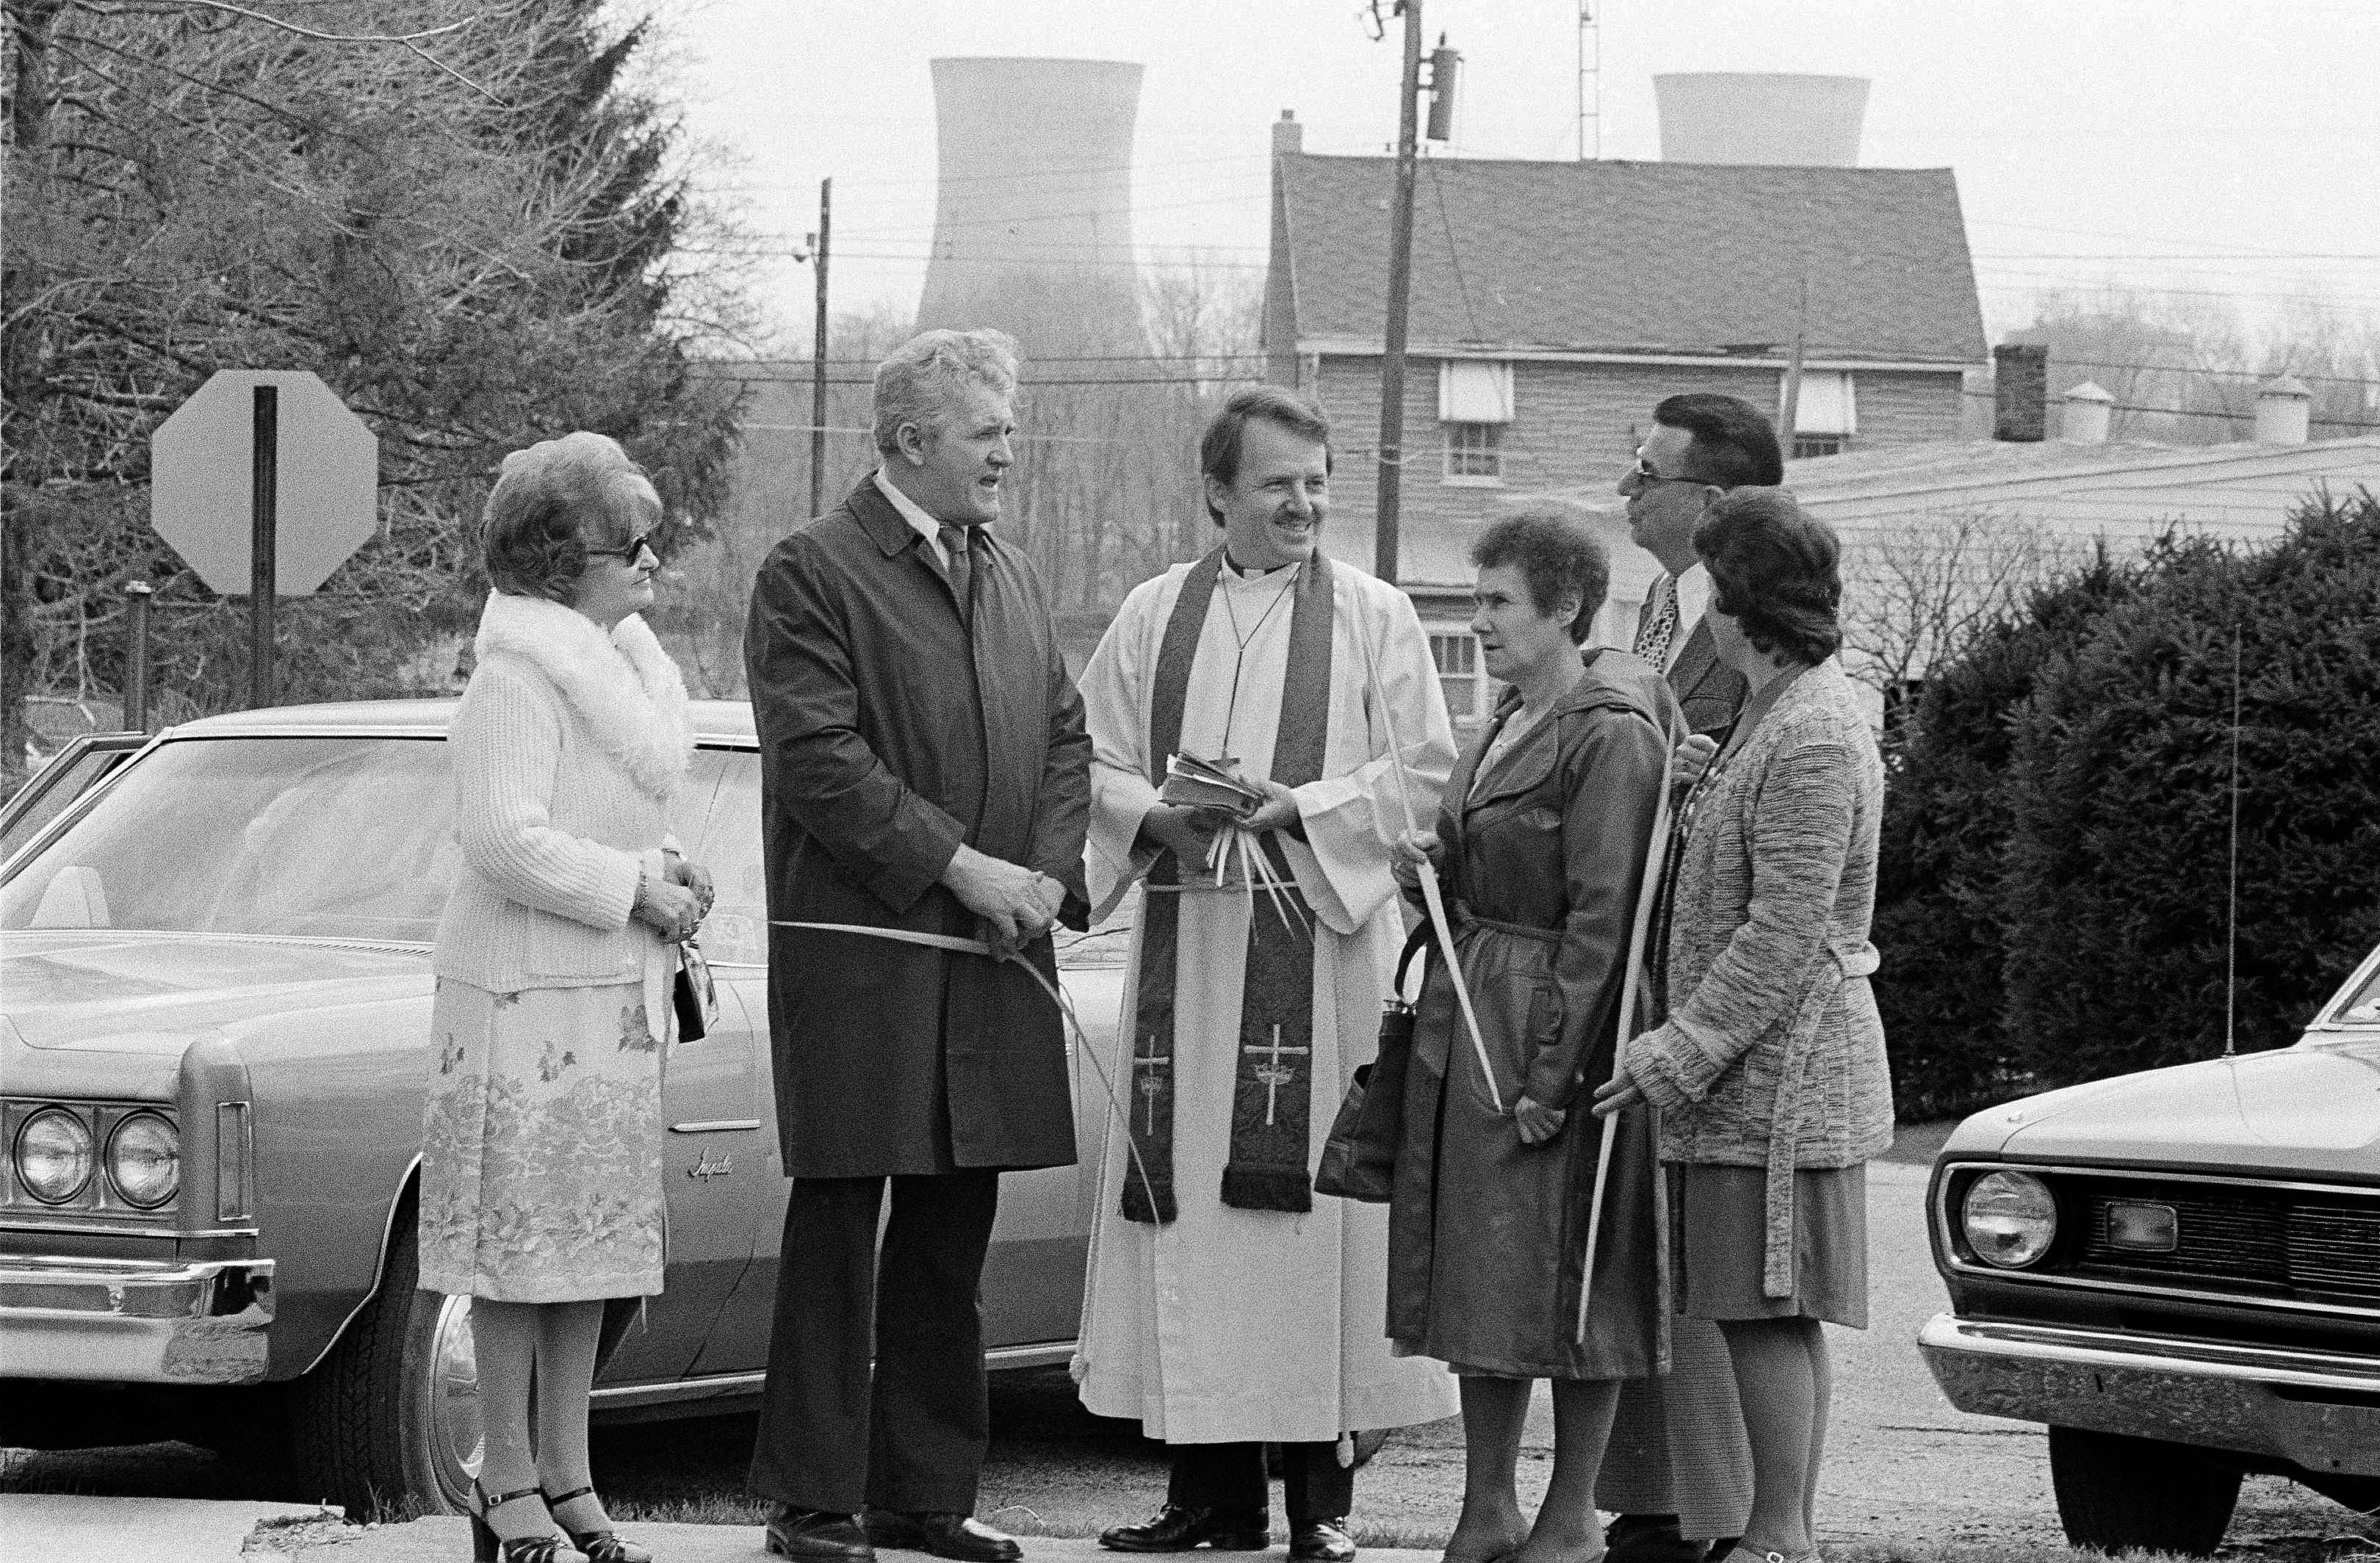 Rev. Frederick Wedemeyer talks with parishioners outside the Zion Lutheran Church in Goldsboro, Pa., following the Palm Sunday services, April 8, 1979. In the background are cooling towers of Three Mile Island nuclear power plant that is shut down following an accident causing nuclear radiation to leak into the atmosphere. (AP Photo/Prouser)